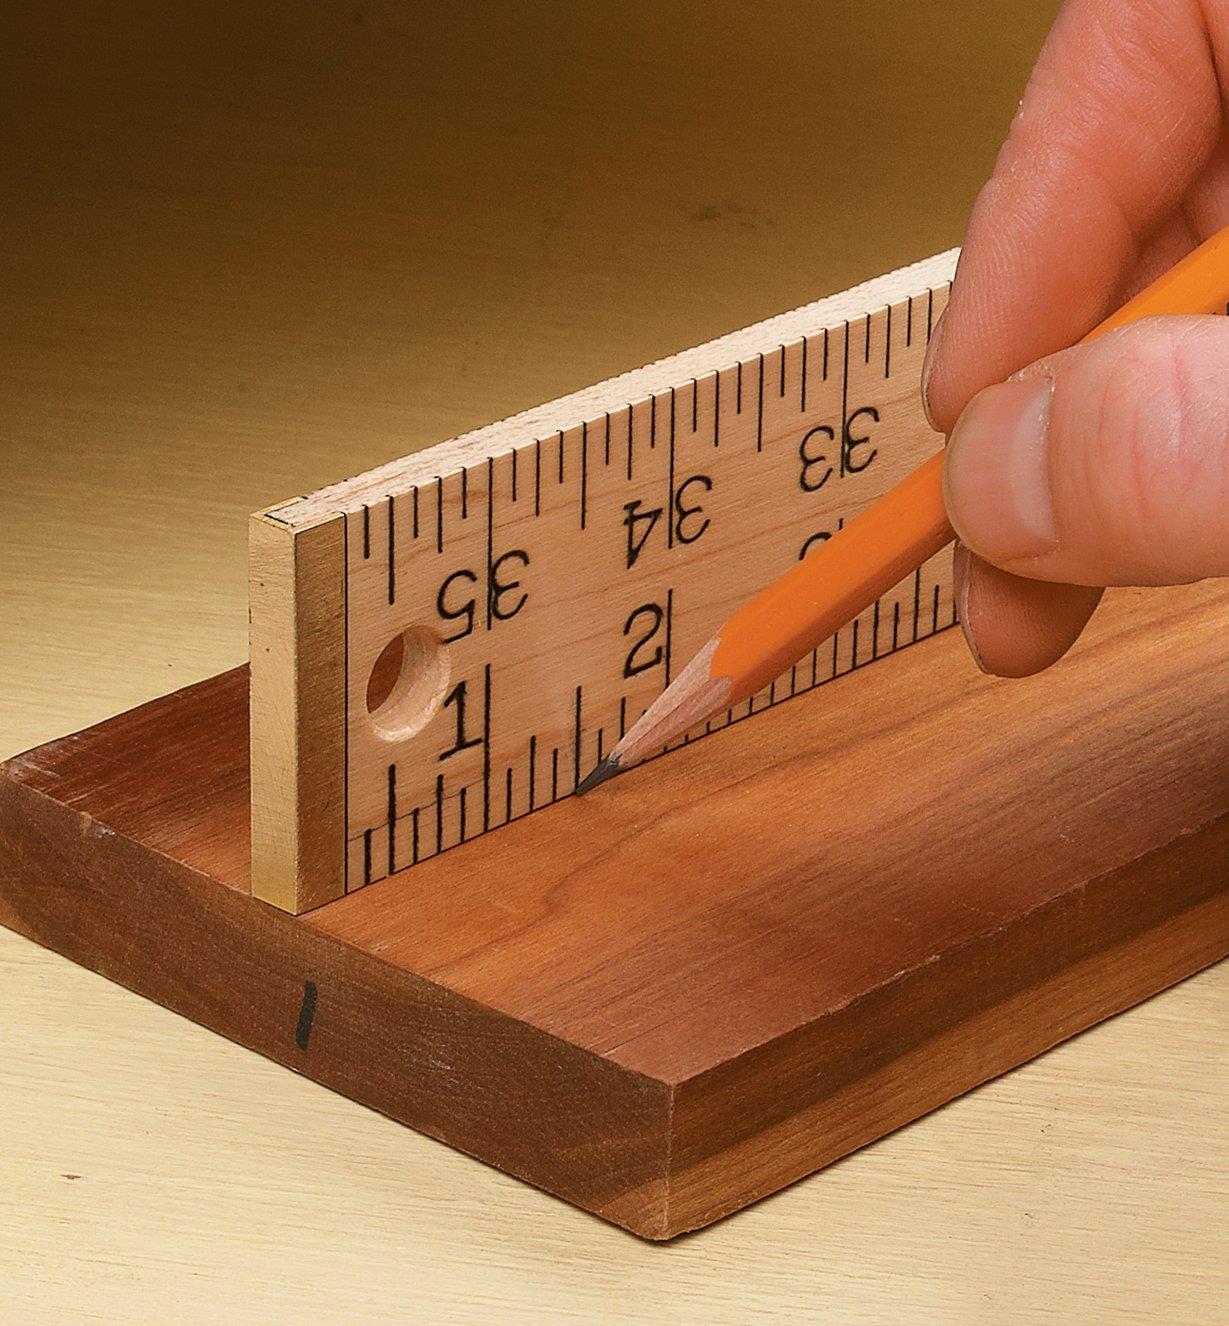 Marking a measurement on a board using a wooden rule standing on edge